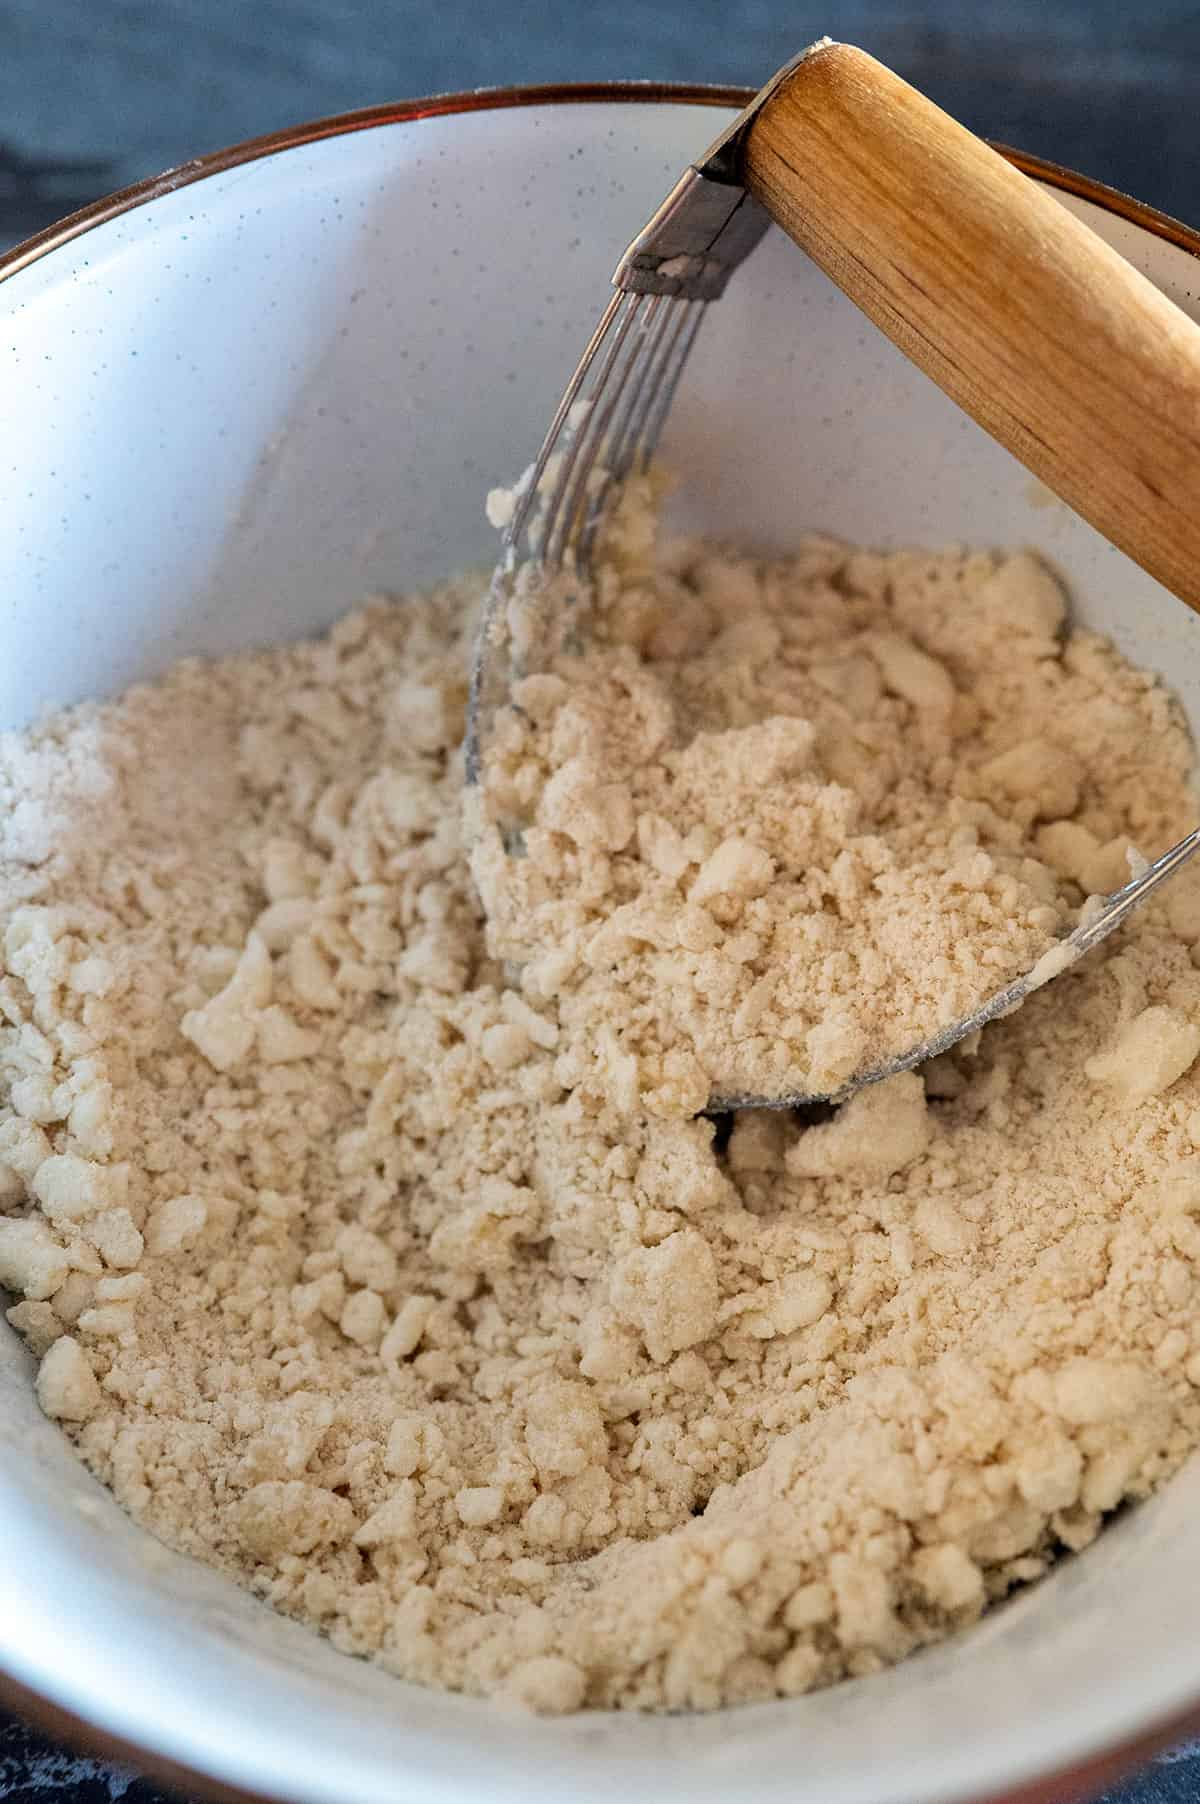 pastry blender mixing flour and fats to create pea-size balls.